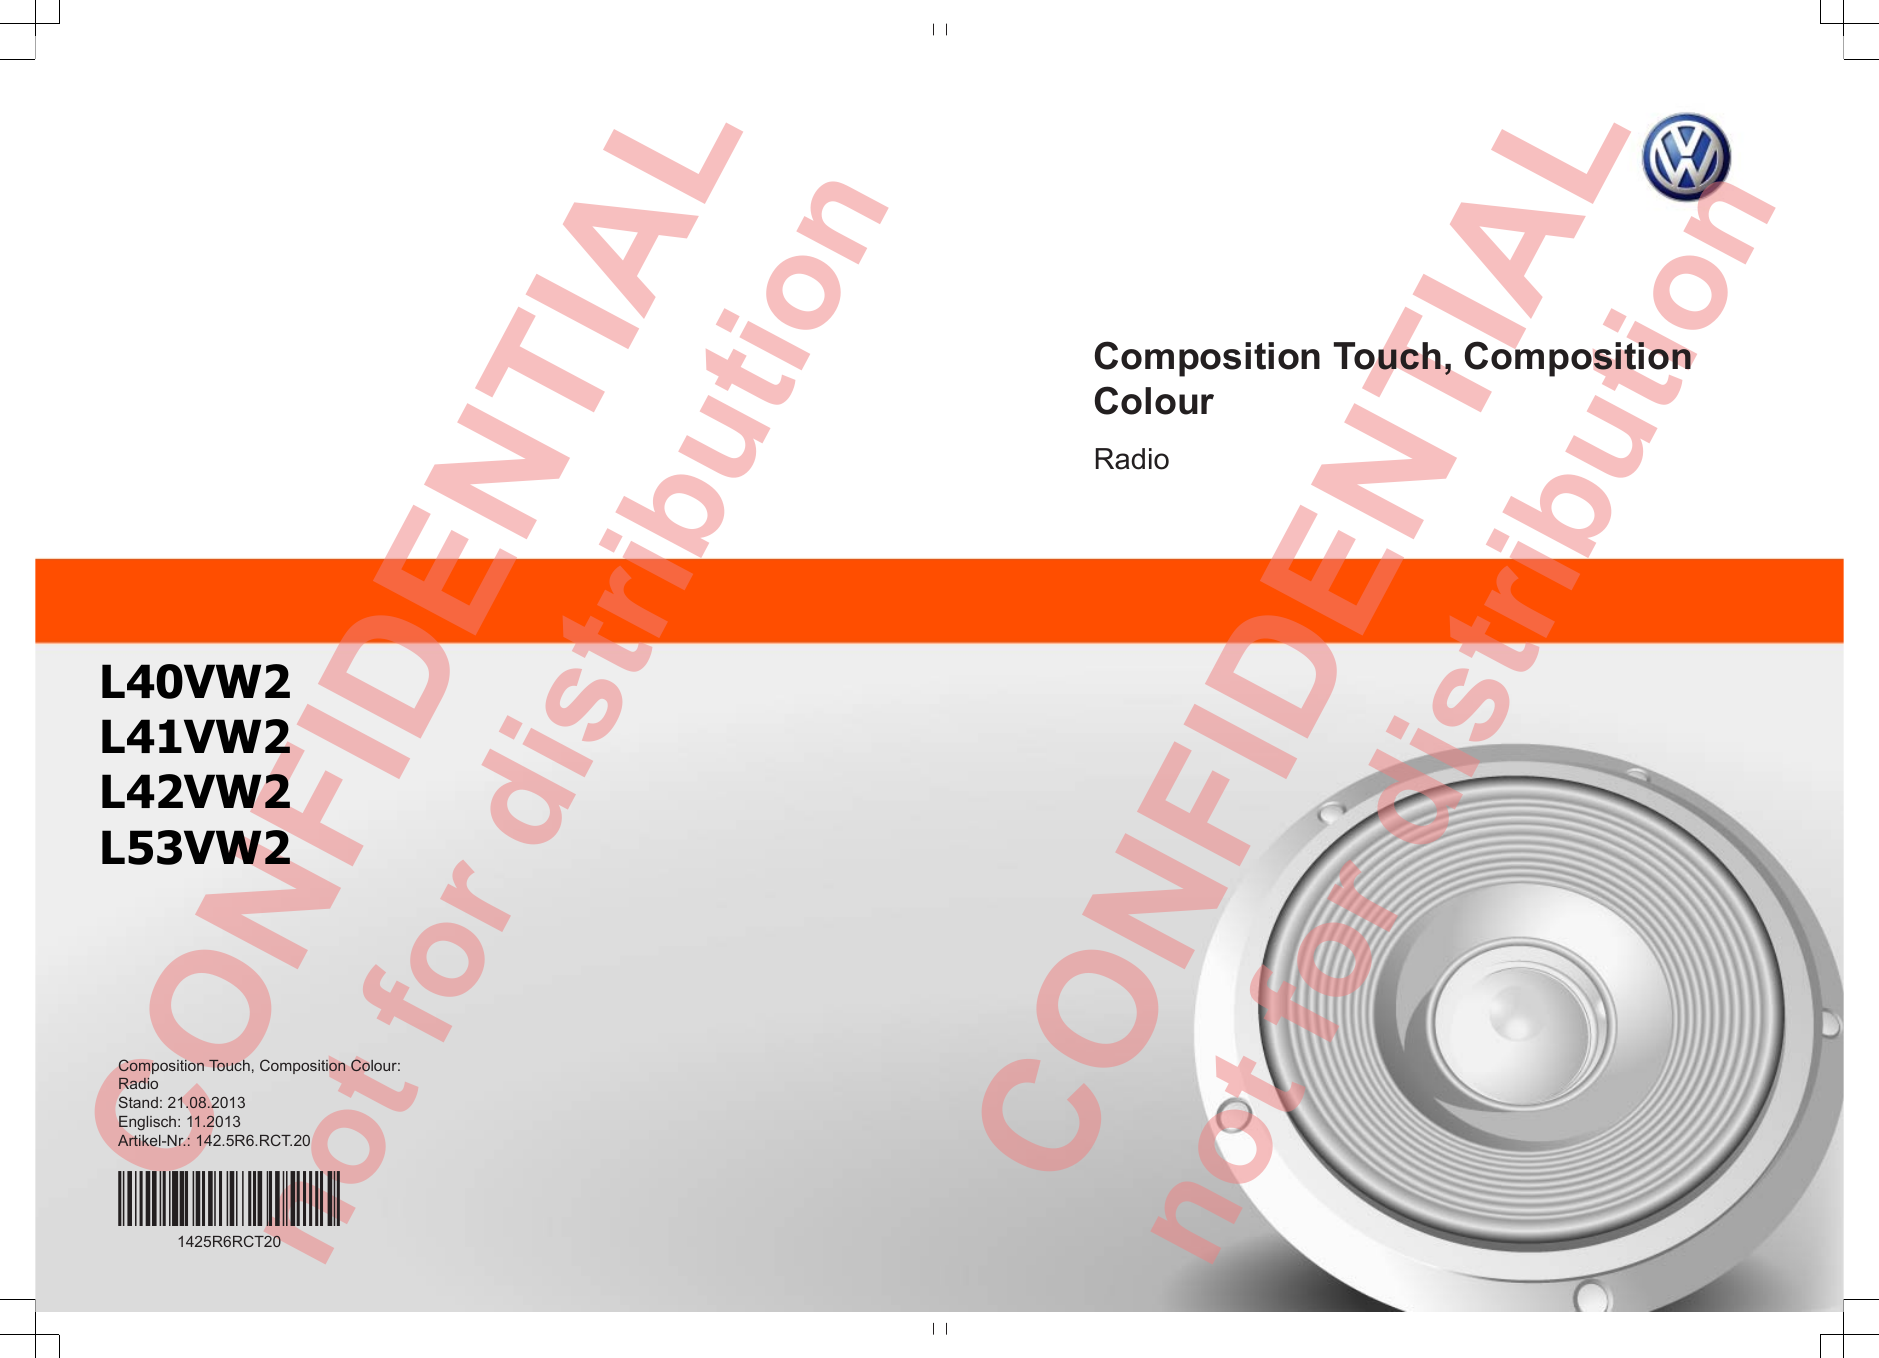  CONFIDENTIAL not for distribution  CONFIDENTIAL not for distribution Composition Touch, CompositionColourRadioComposition Touch, Composition Colour:RadioStand: 21.08.2013Englisch: 11.2013Artikel-Nr.: 142.5R6.RCT.201425R6RCT20L40VW2 L41VW2 L42VW2 L53VW2 